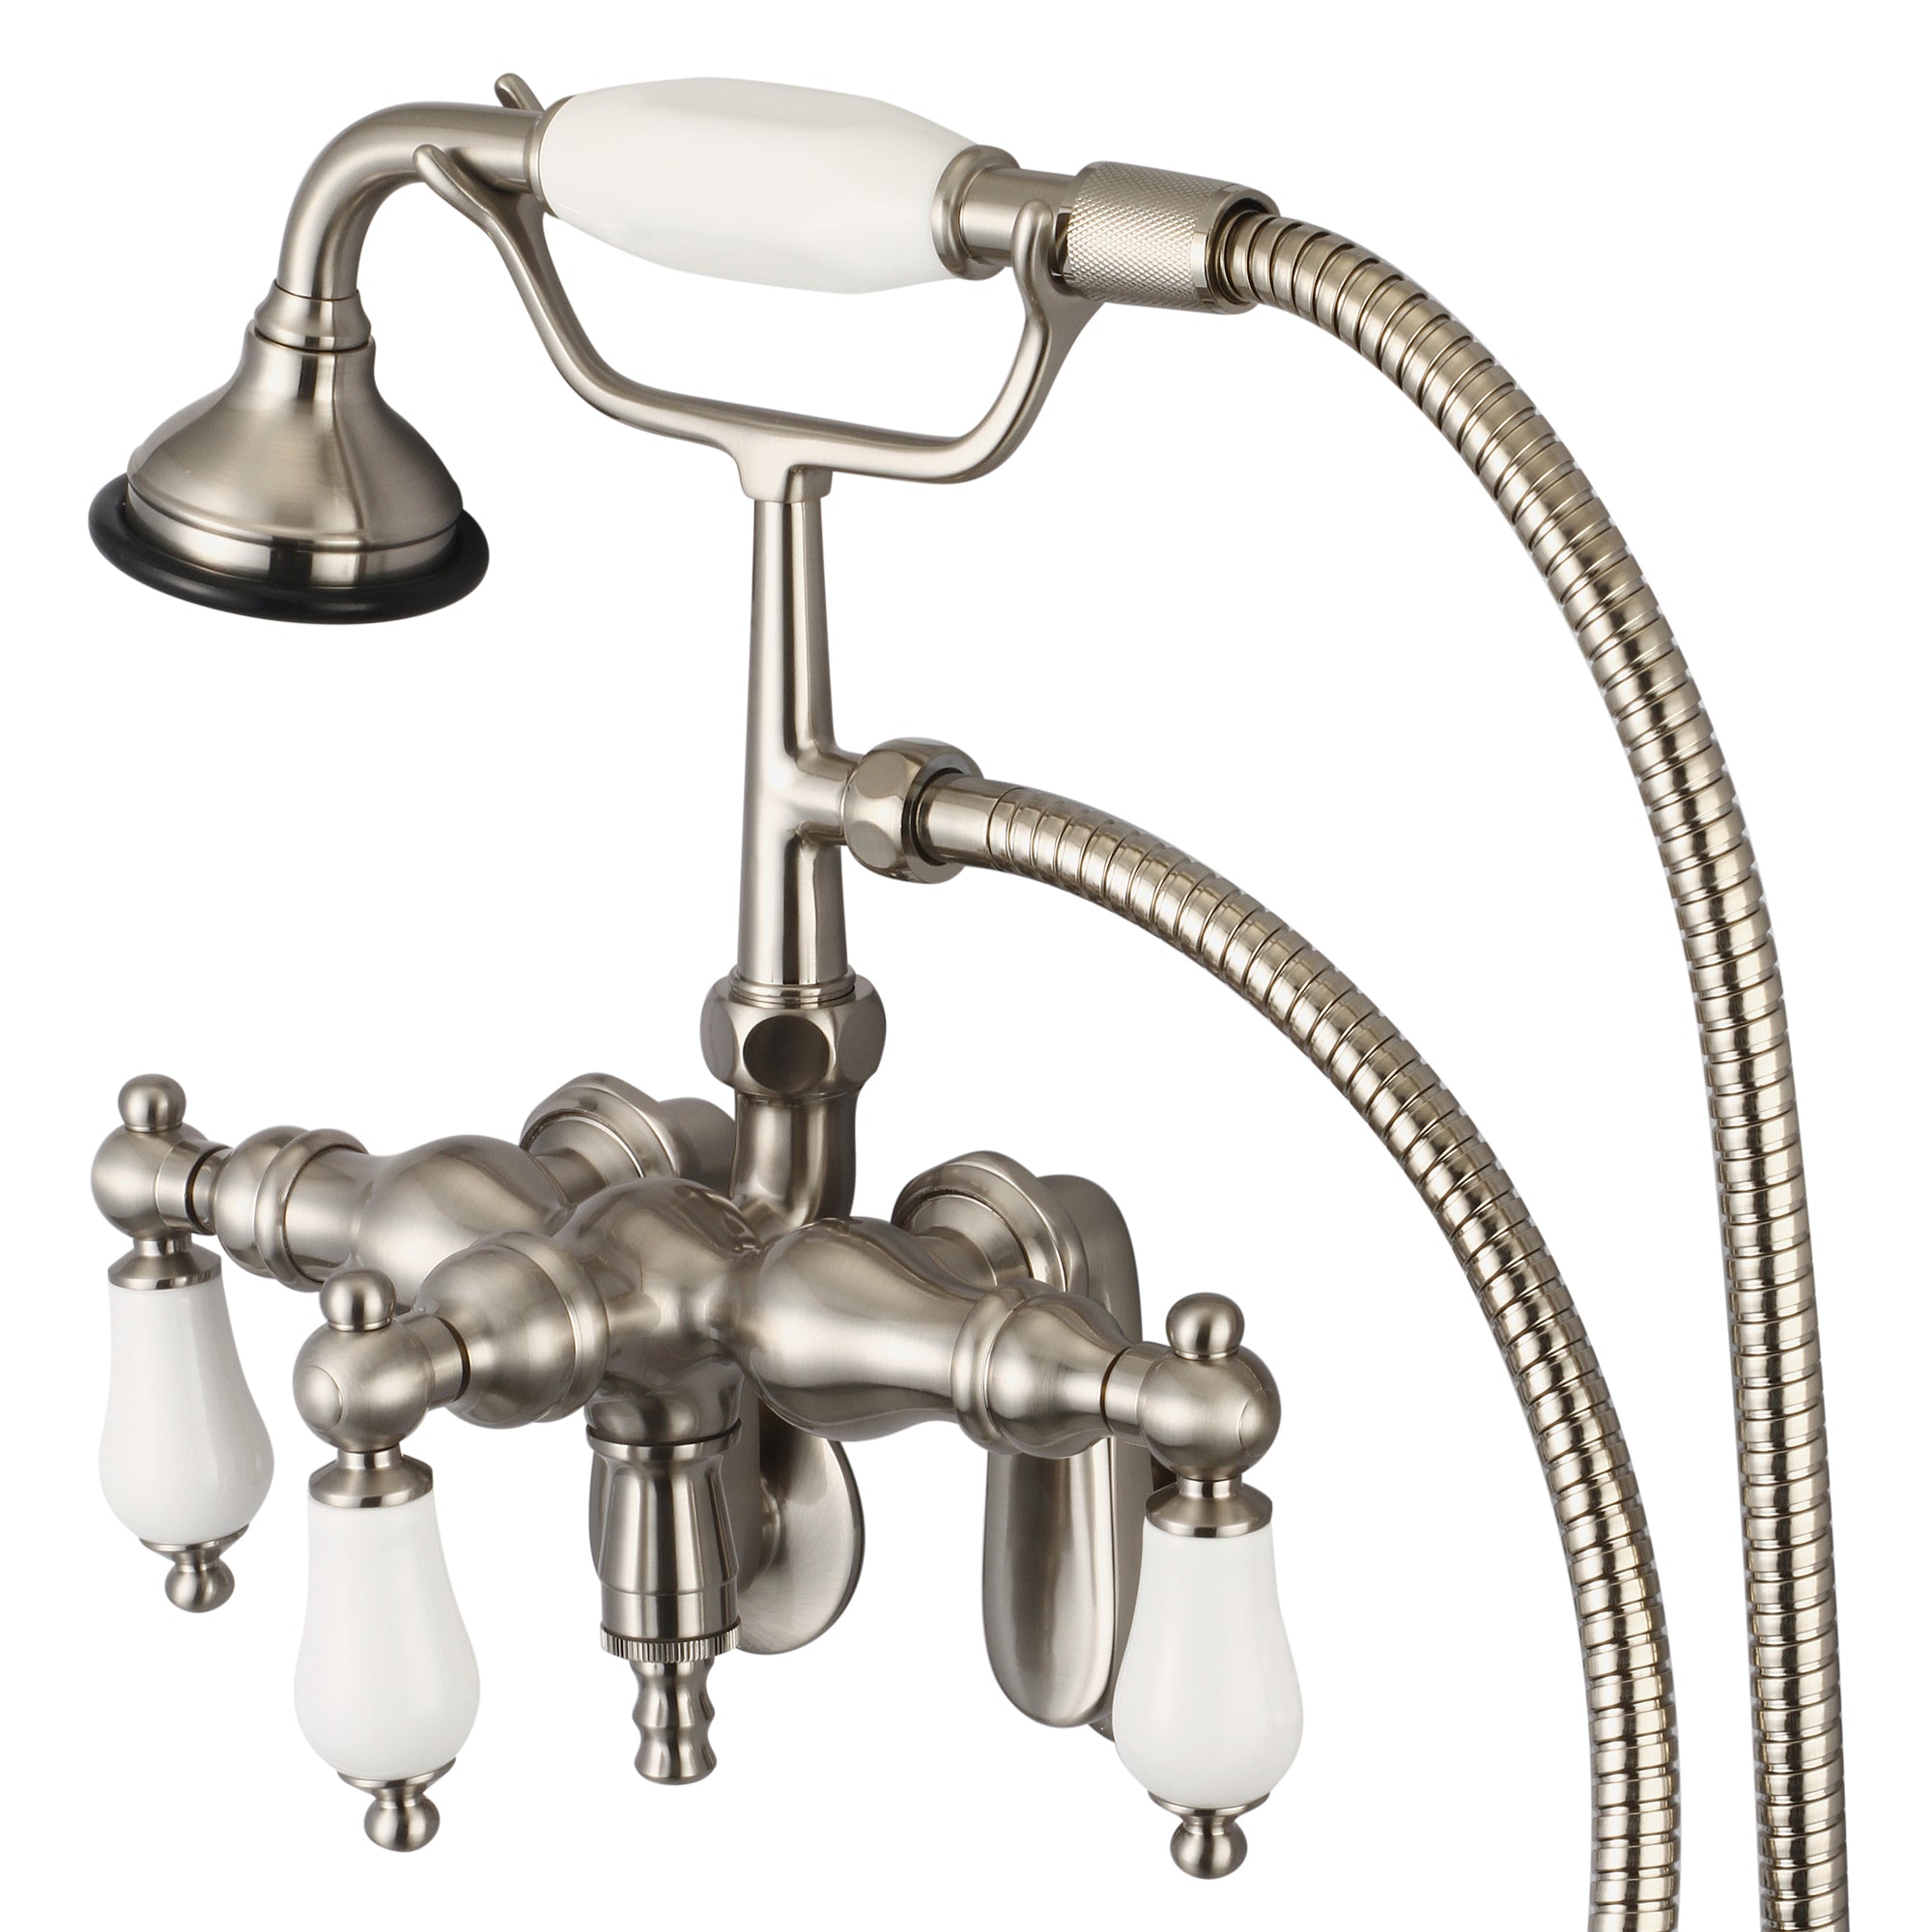 Water Creation | Vintage Classic Adjustable Center Wall Mount Tub Faucet With Down Spout, Swivel Wall Connector & Handheld Shower in Brushed Nickel Finish With Porcelain Lever Handles Without labels | F6-0018-02-PL